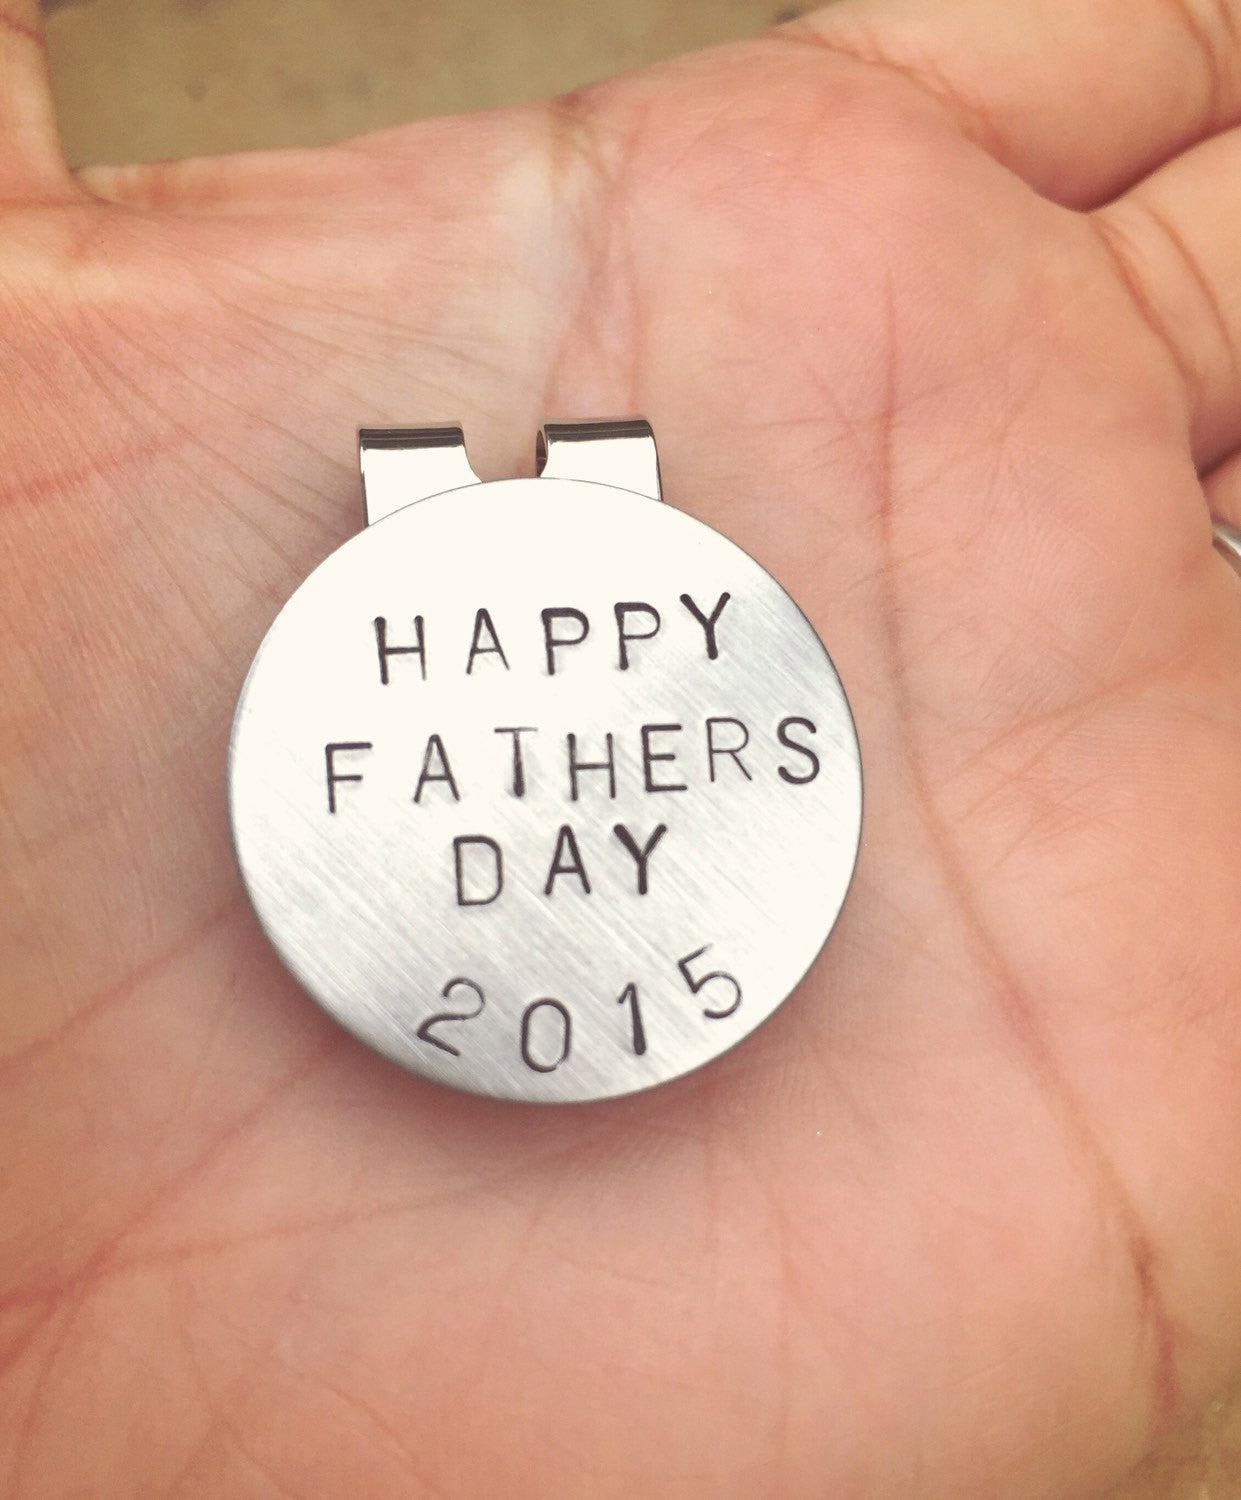 Golf Marker, Kick Putt Dad, Boyfriend Gifts, Golf Gifts, Husband Gift, Personalized Golf Marker, Hat Clip, Gifts for Dad, natashaaloha - Natashaaloha, jewelry, bracelets, necklace, keychains, fishing lures, gifts for men, charms, personalized, 